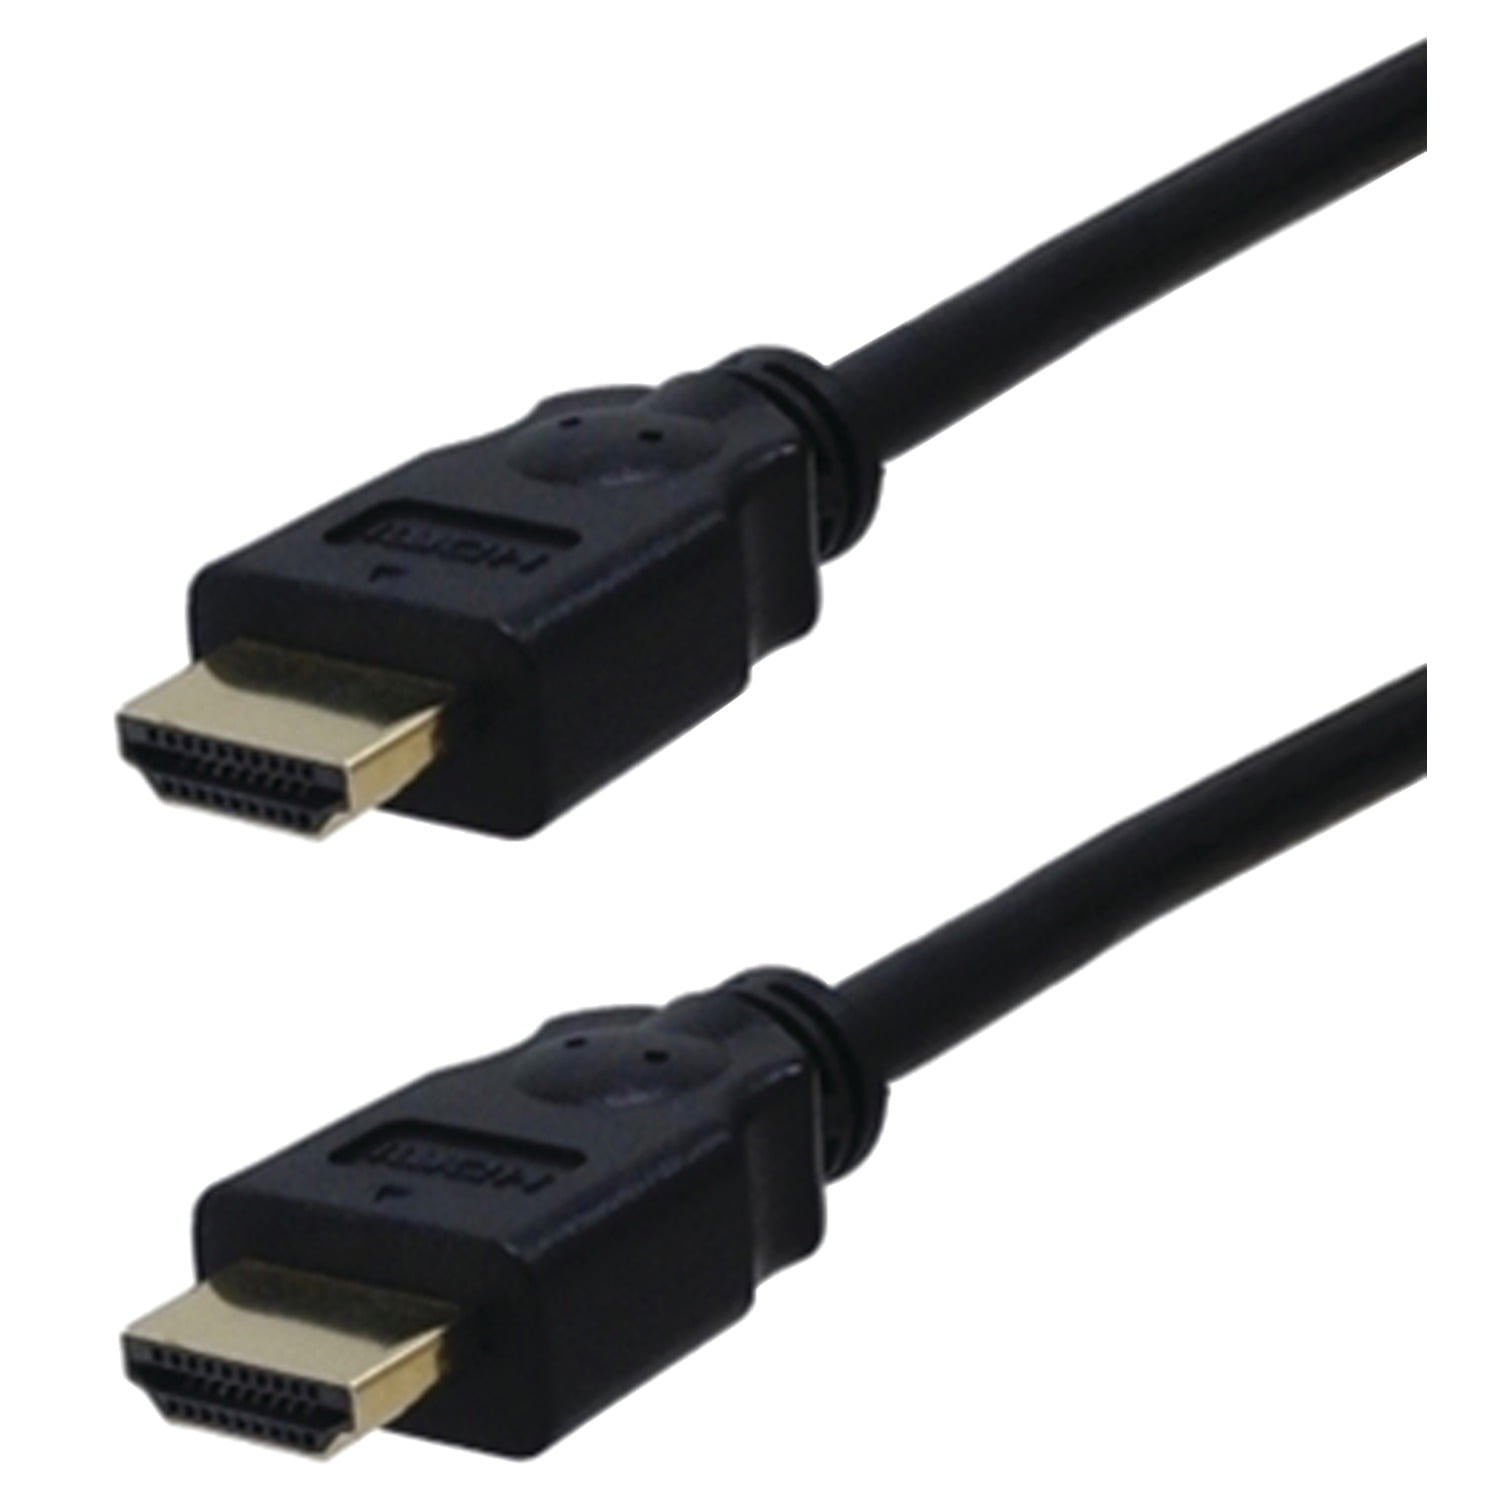 VERICOM Vericom Gold-plated High-speed Hdmi Cable With Ethernet 3ft